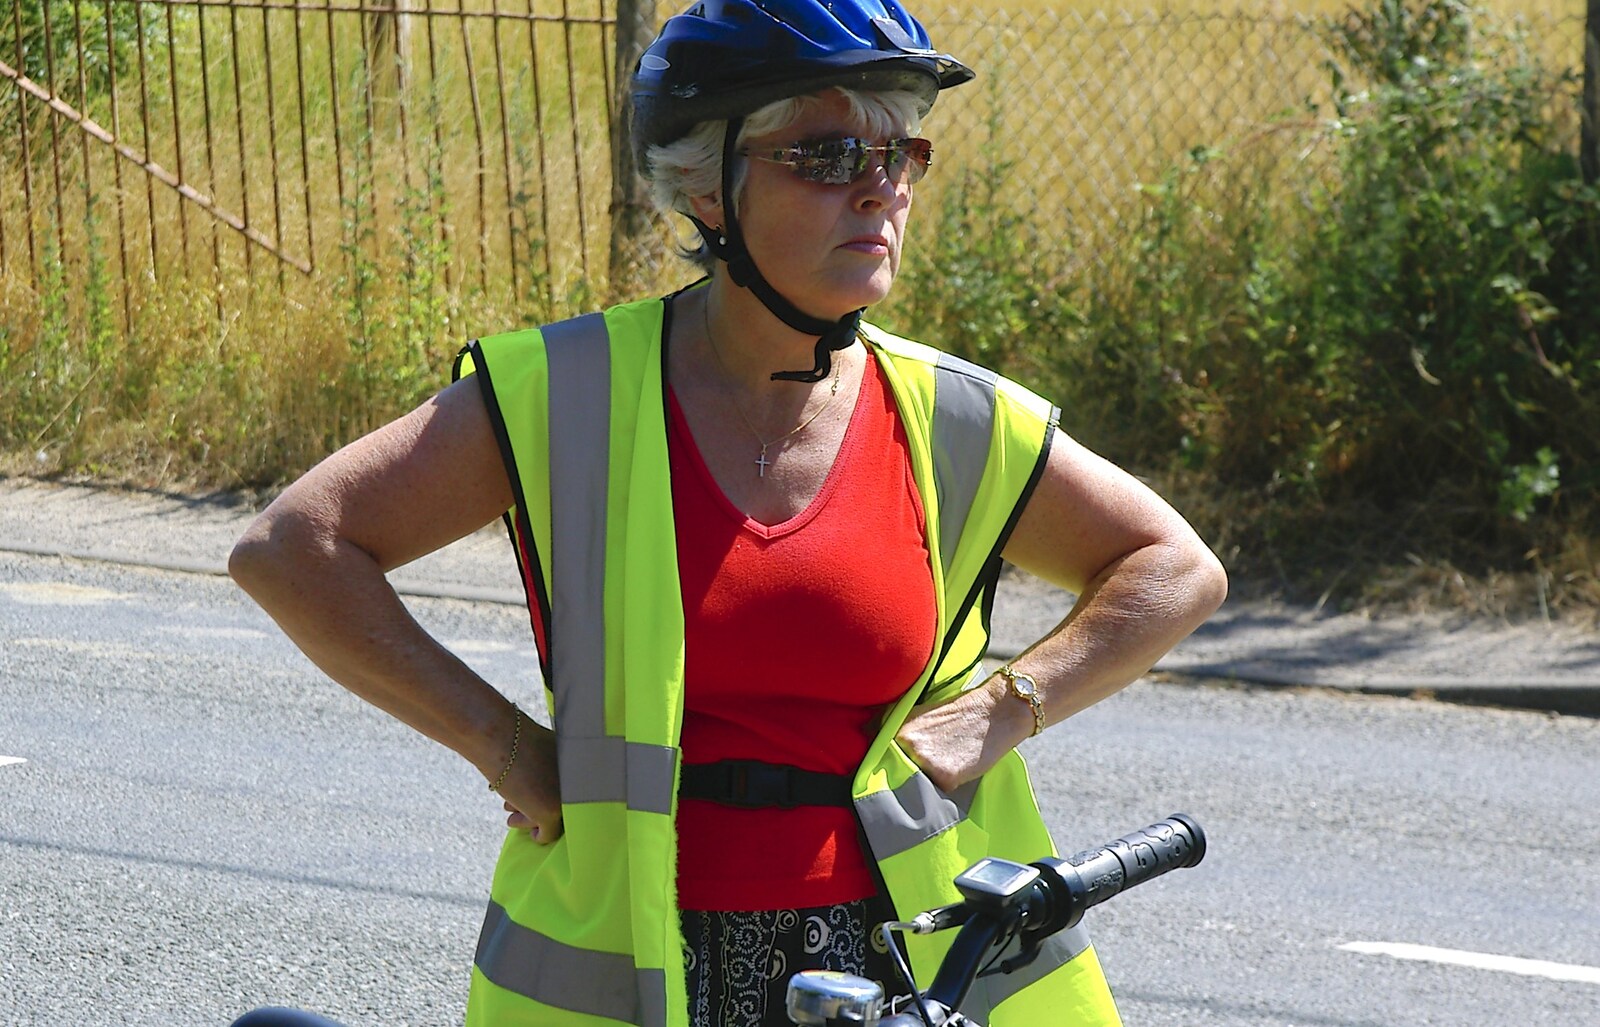 Spammy waits by her bike from The BSCC Charity Bike Ride, Orford, Suffolk - 15th July 2006